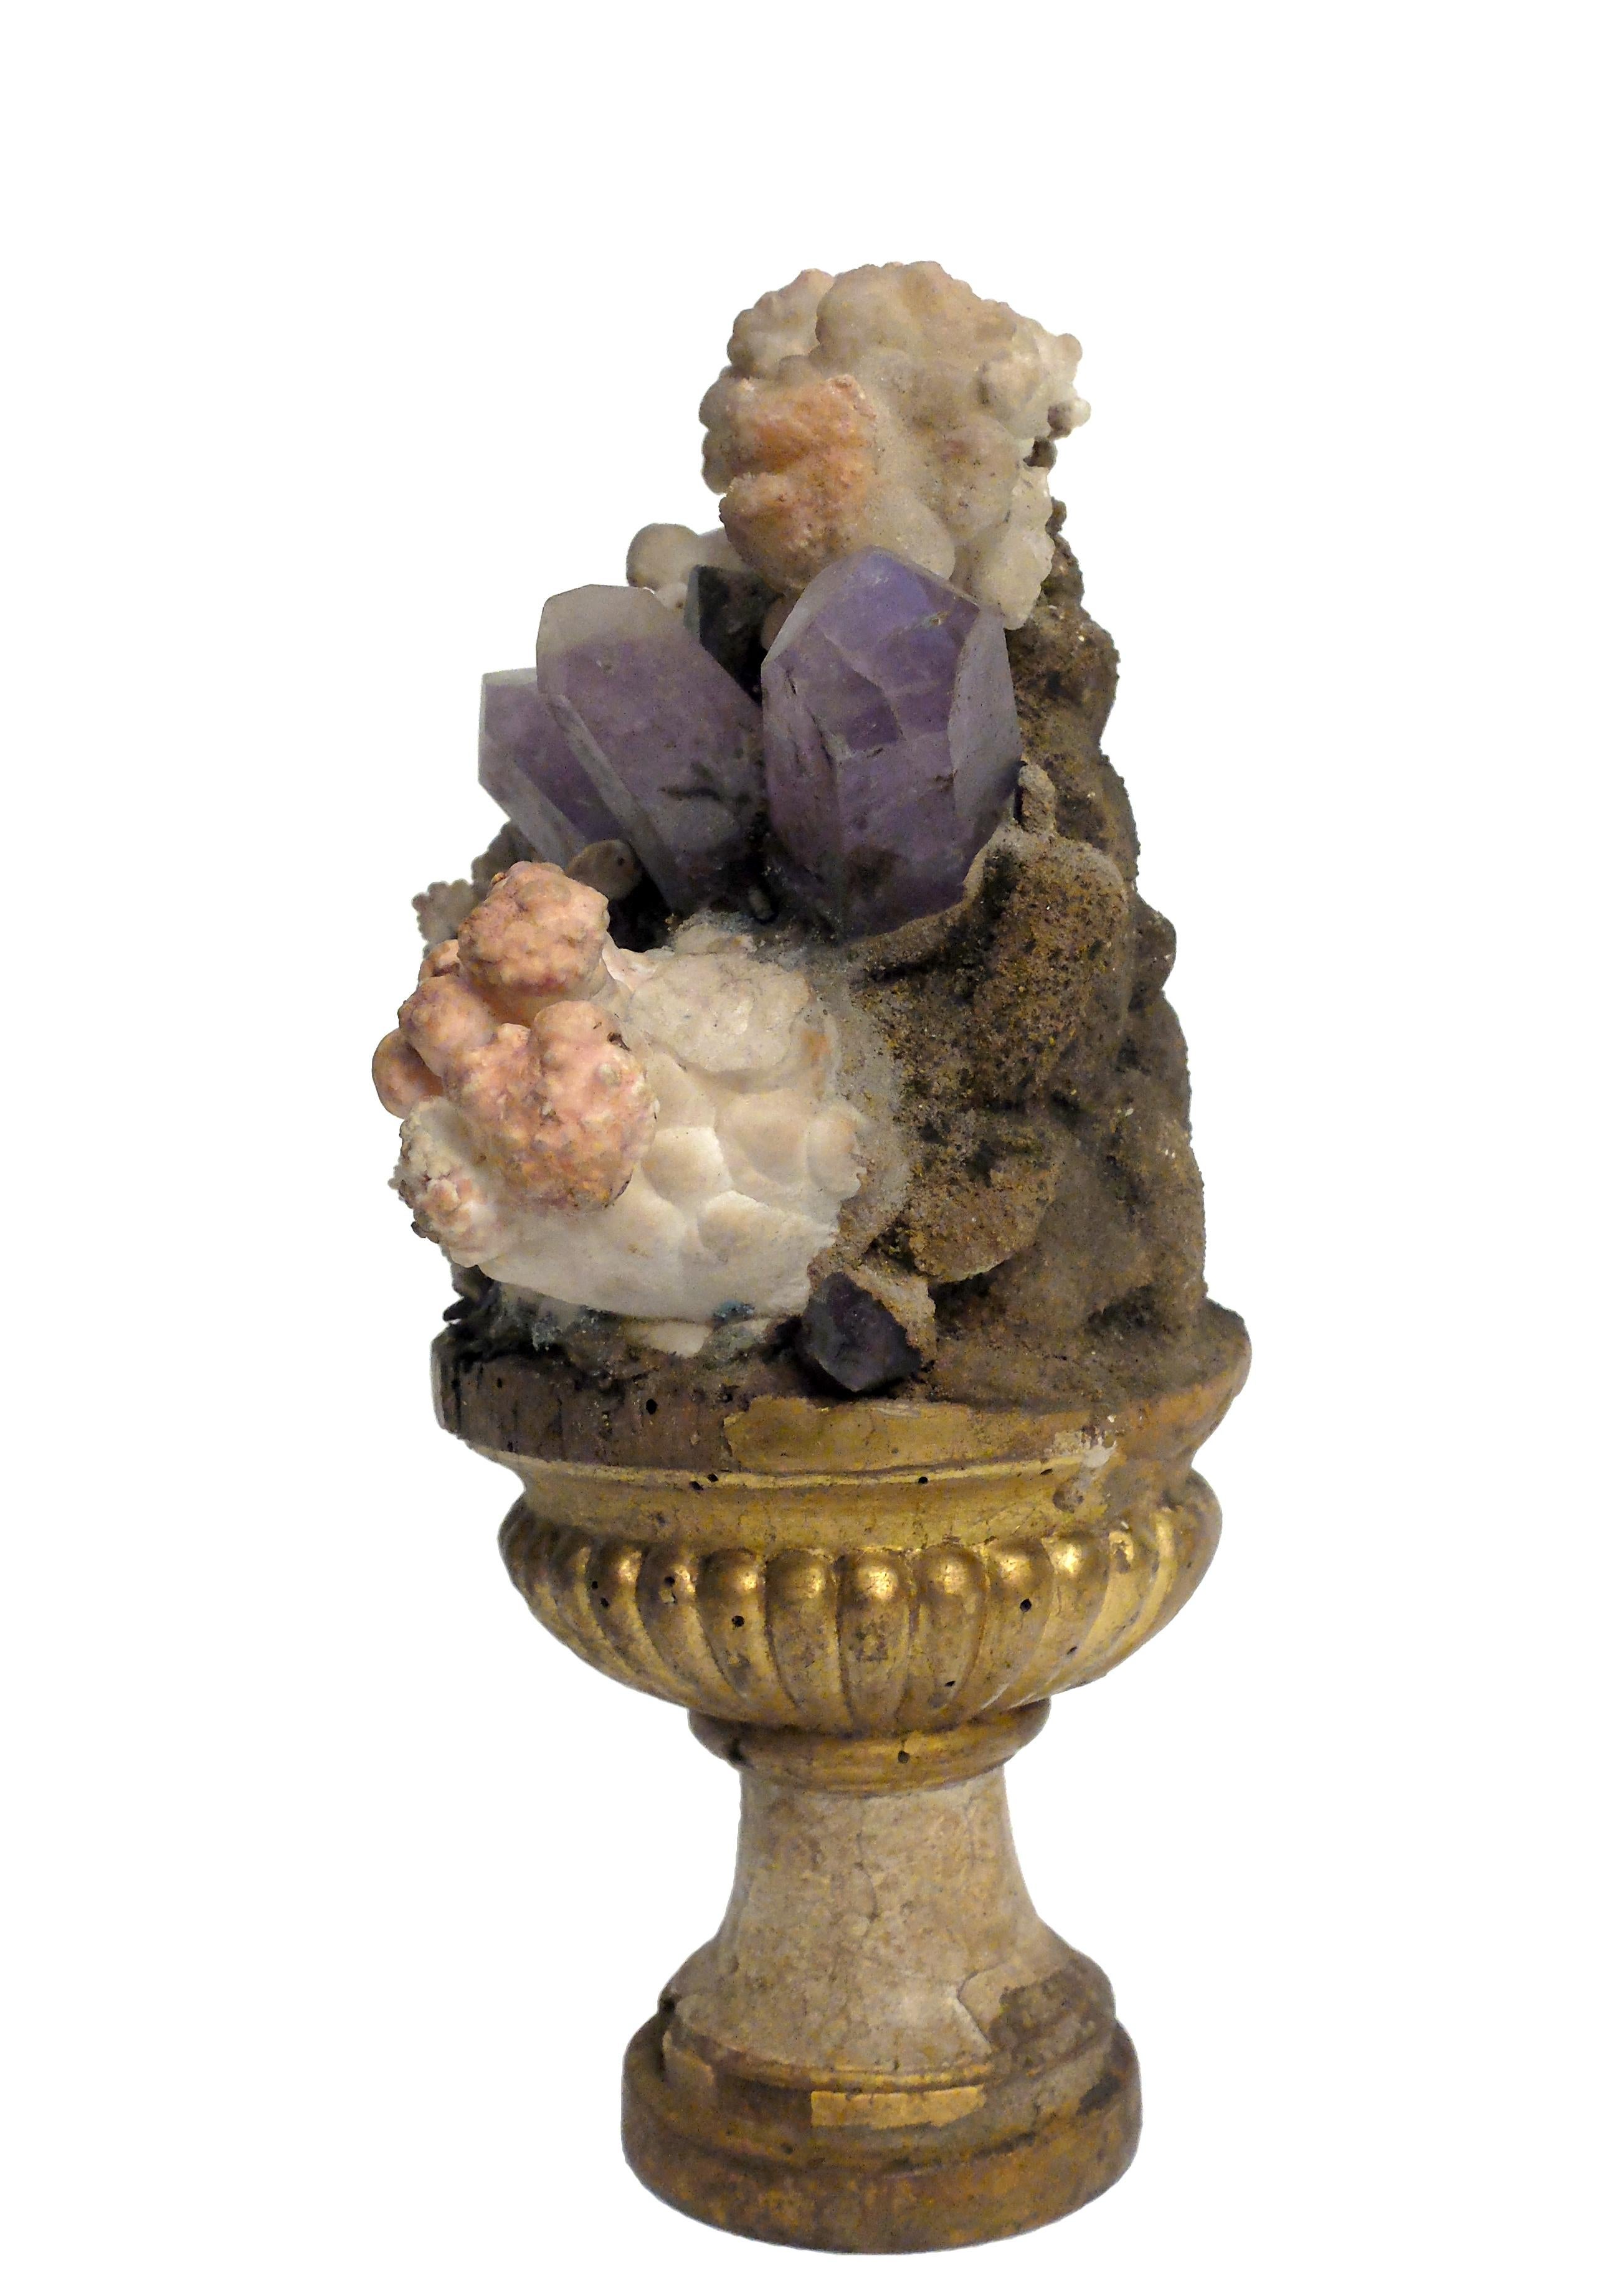 A natural mineral specimen: A composition of amethyst and calcite flower crystals Druze, mounted over the guild-plated wooden base on a vase shape.